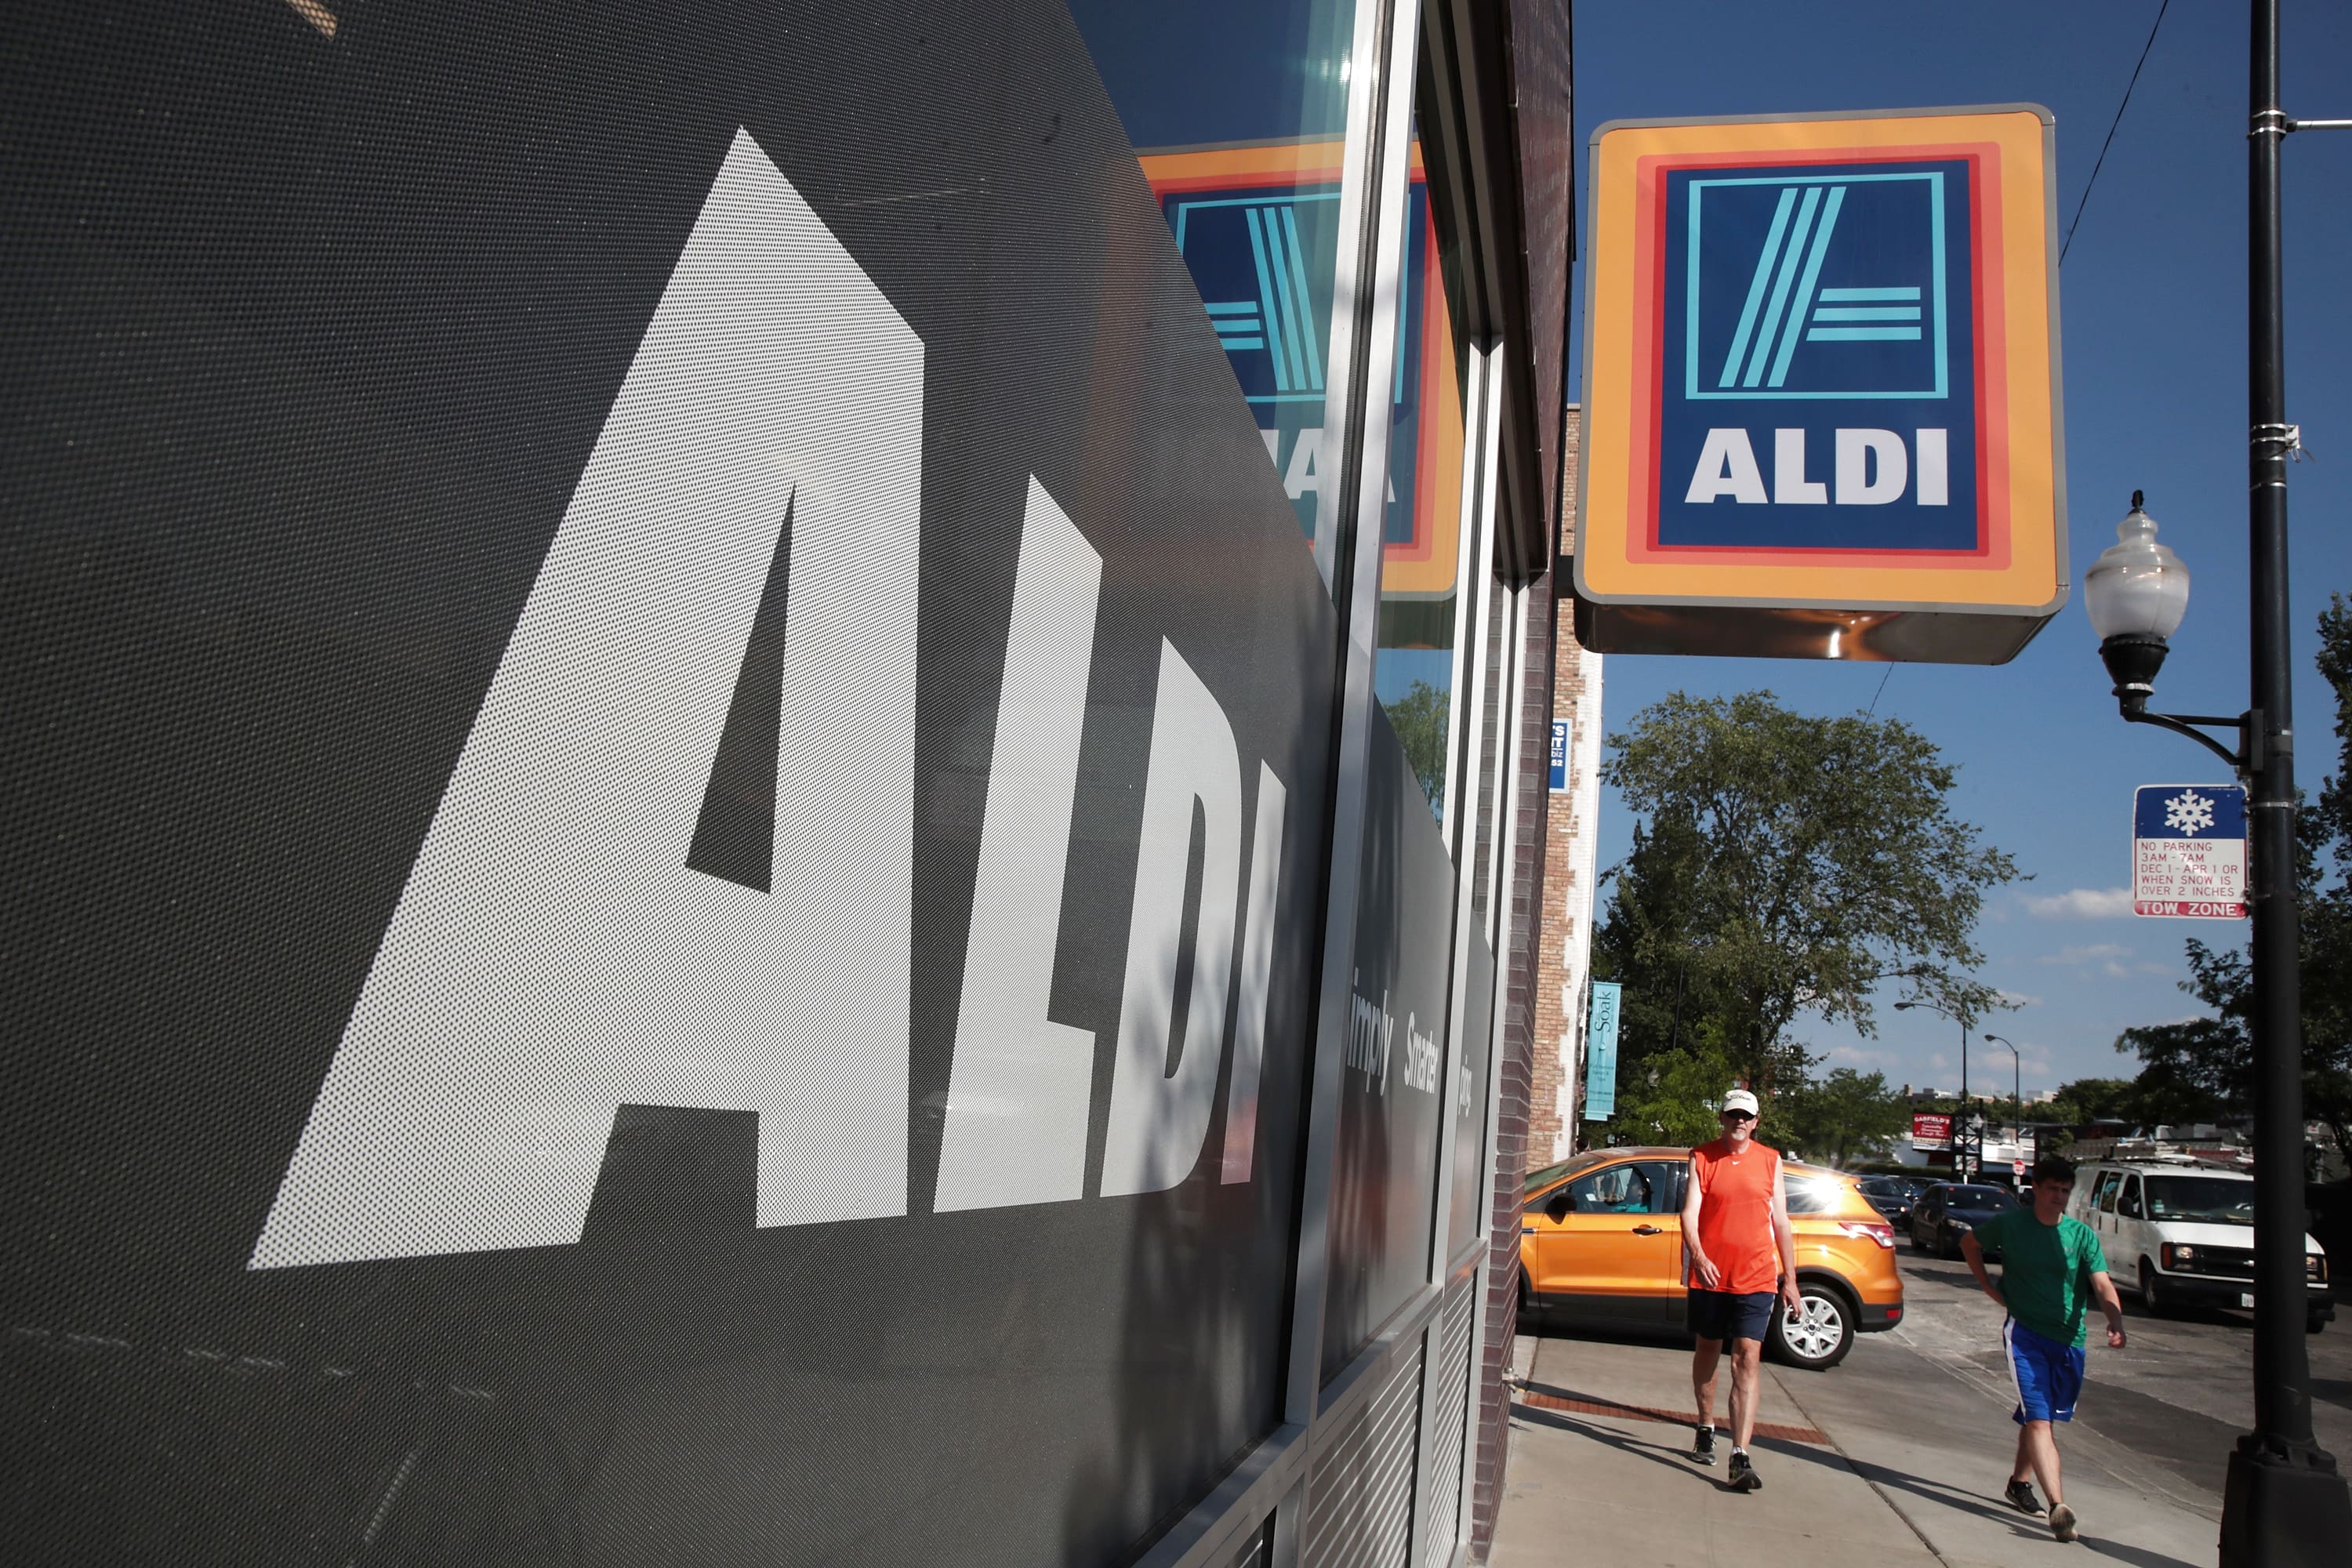 Aldi plans to add 100 new stores in the US and expand the pickup